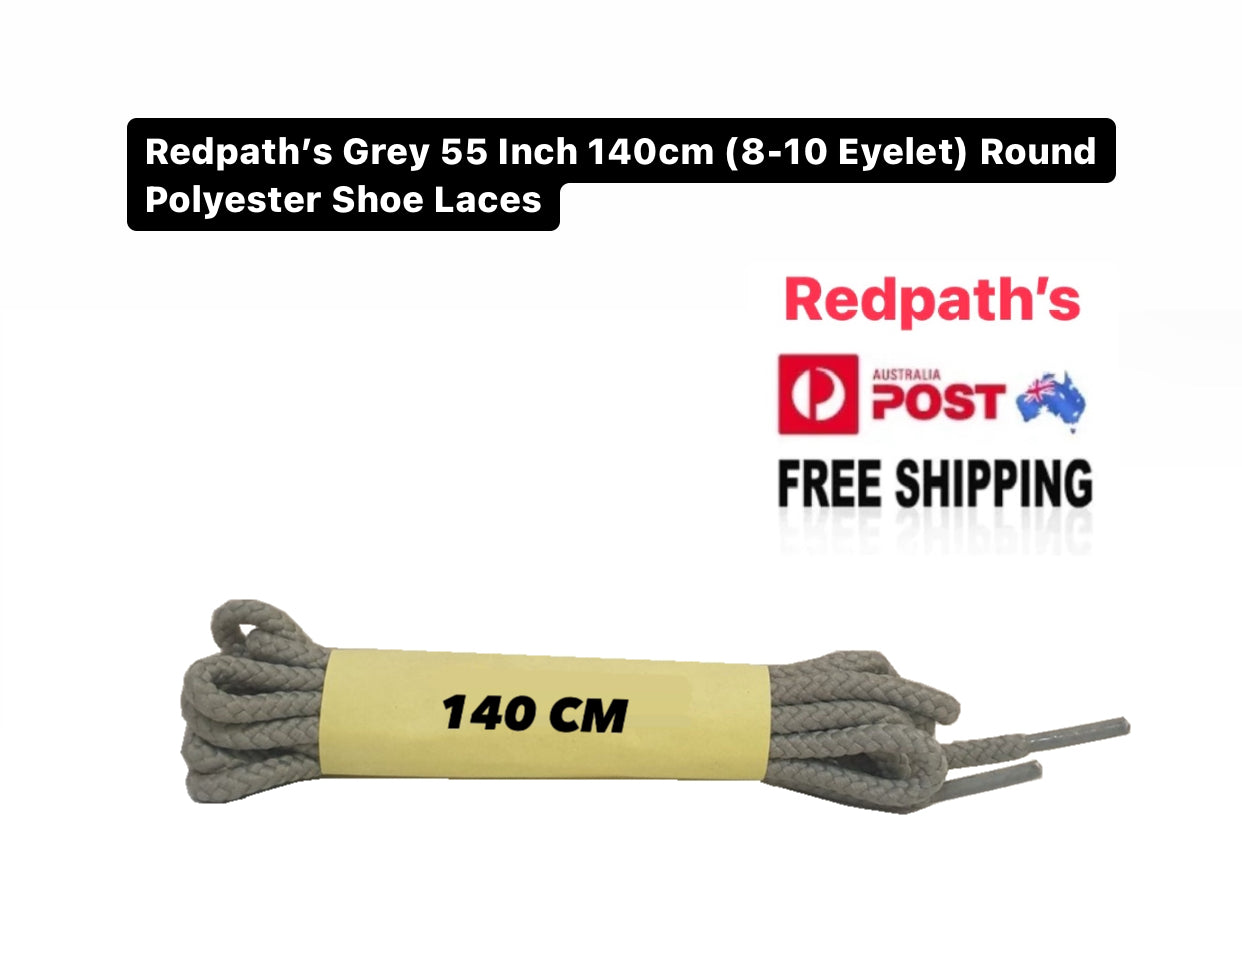 Redpath’s Grey 55 Inch 140cm (8-10 Eyelet) Round Polyester Shoe Laces